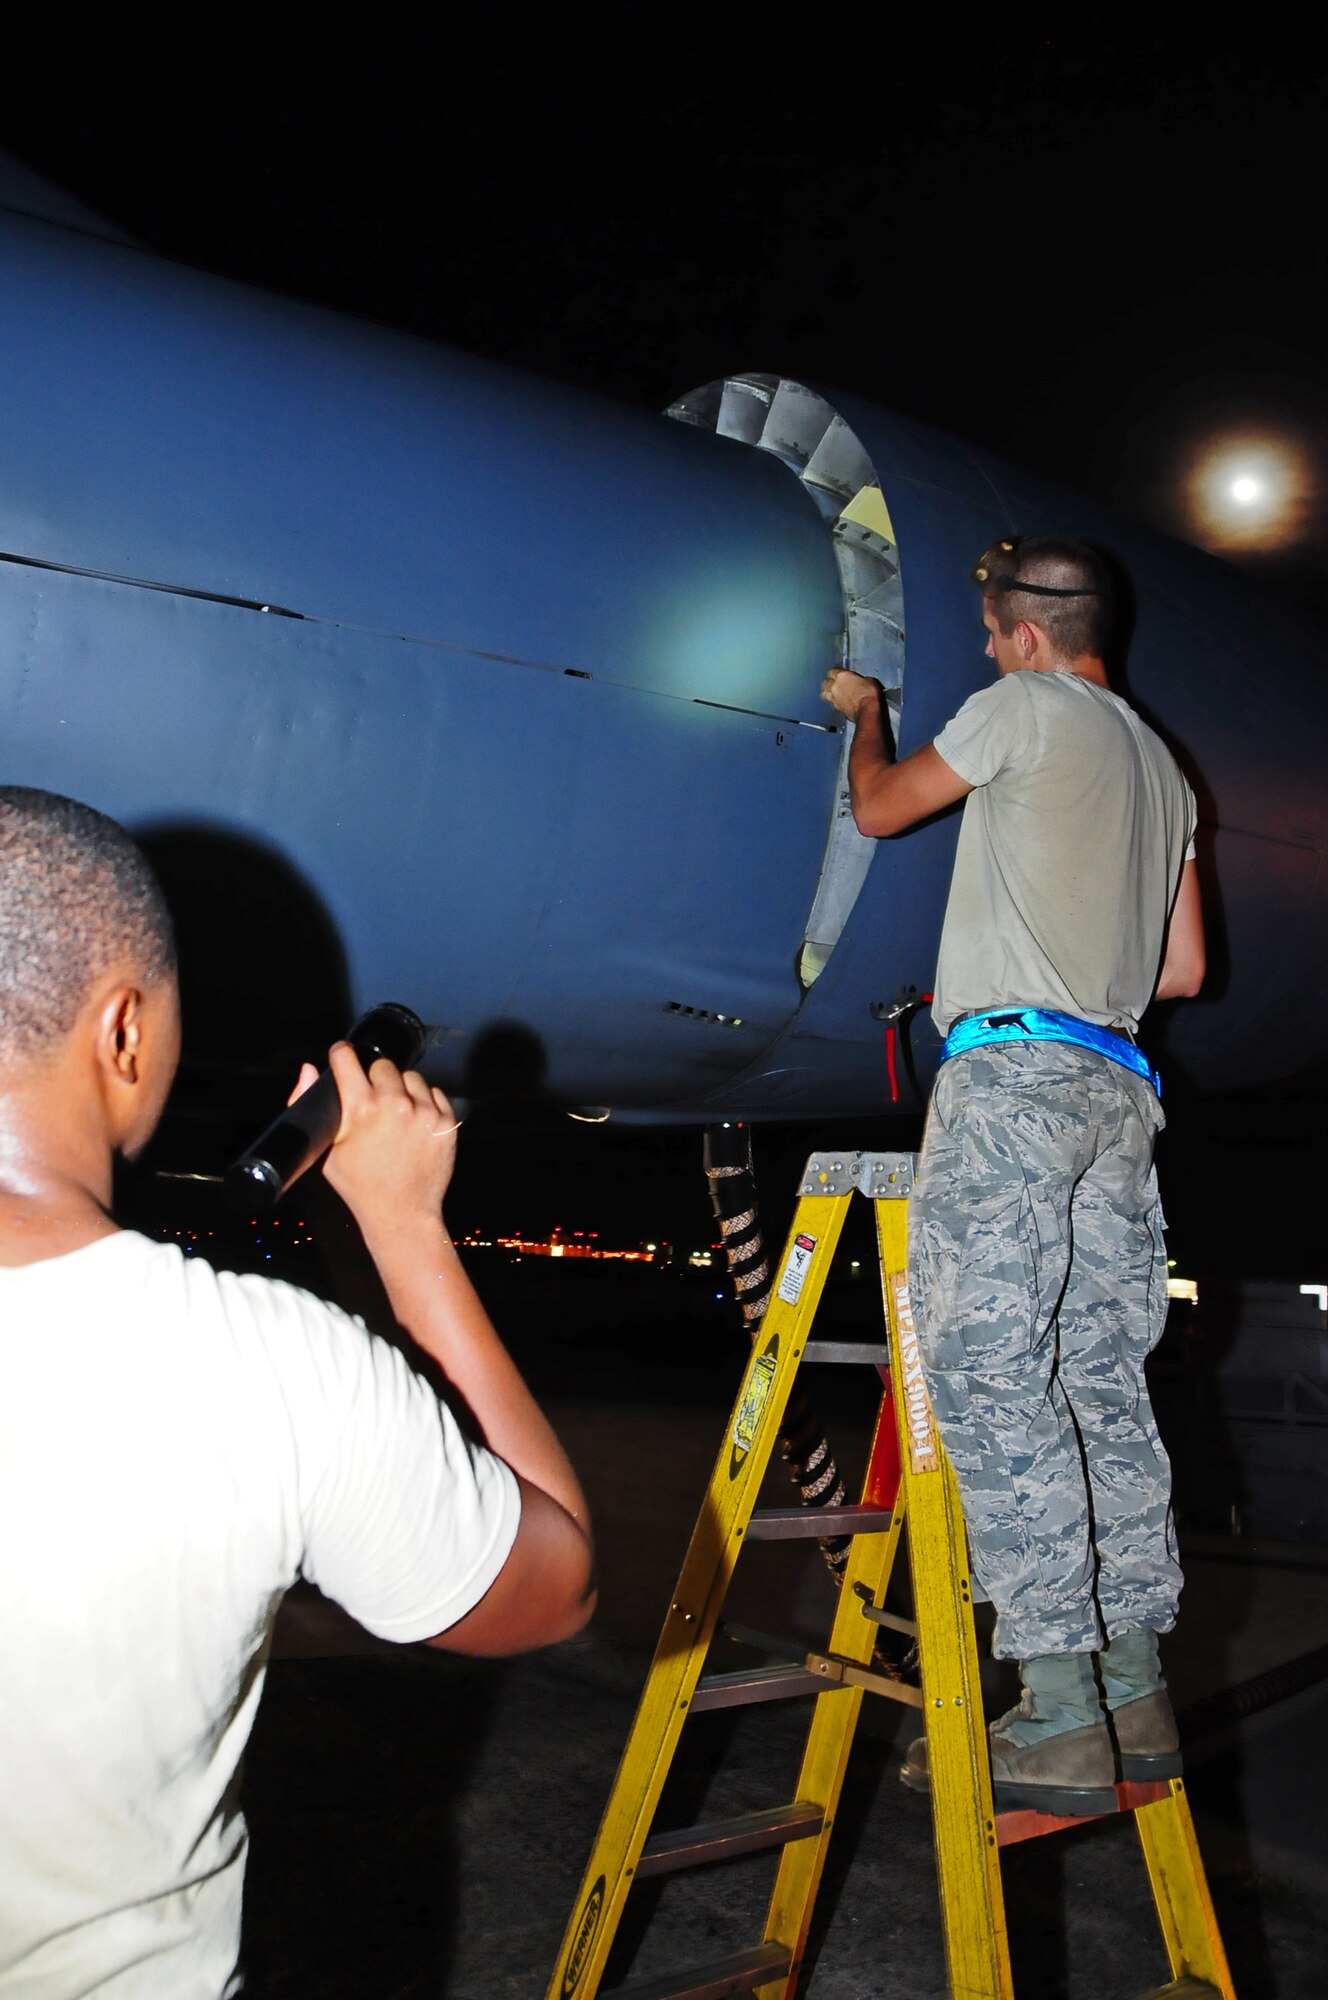 ANDERSEN AIR FORCE BASE, Guam -- Staff Sgt. Oliver Johnson, 36th Expeditionary Aircraft Maintenance Squadron crew chief, holds the flashlight while Airman 1st Class Bruce Brimm, 36th EAMXS crew chief, inspects the exterior of a B-52 Stratofortress here July 31. The 36th EAMXS Airmen make sure the B-52 is ready for the flight in support of the Rim of the Pacific Exercise. (U.S. Air Force photo by Airman 1st Class Marianique Santos/Released)